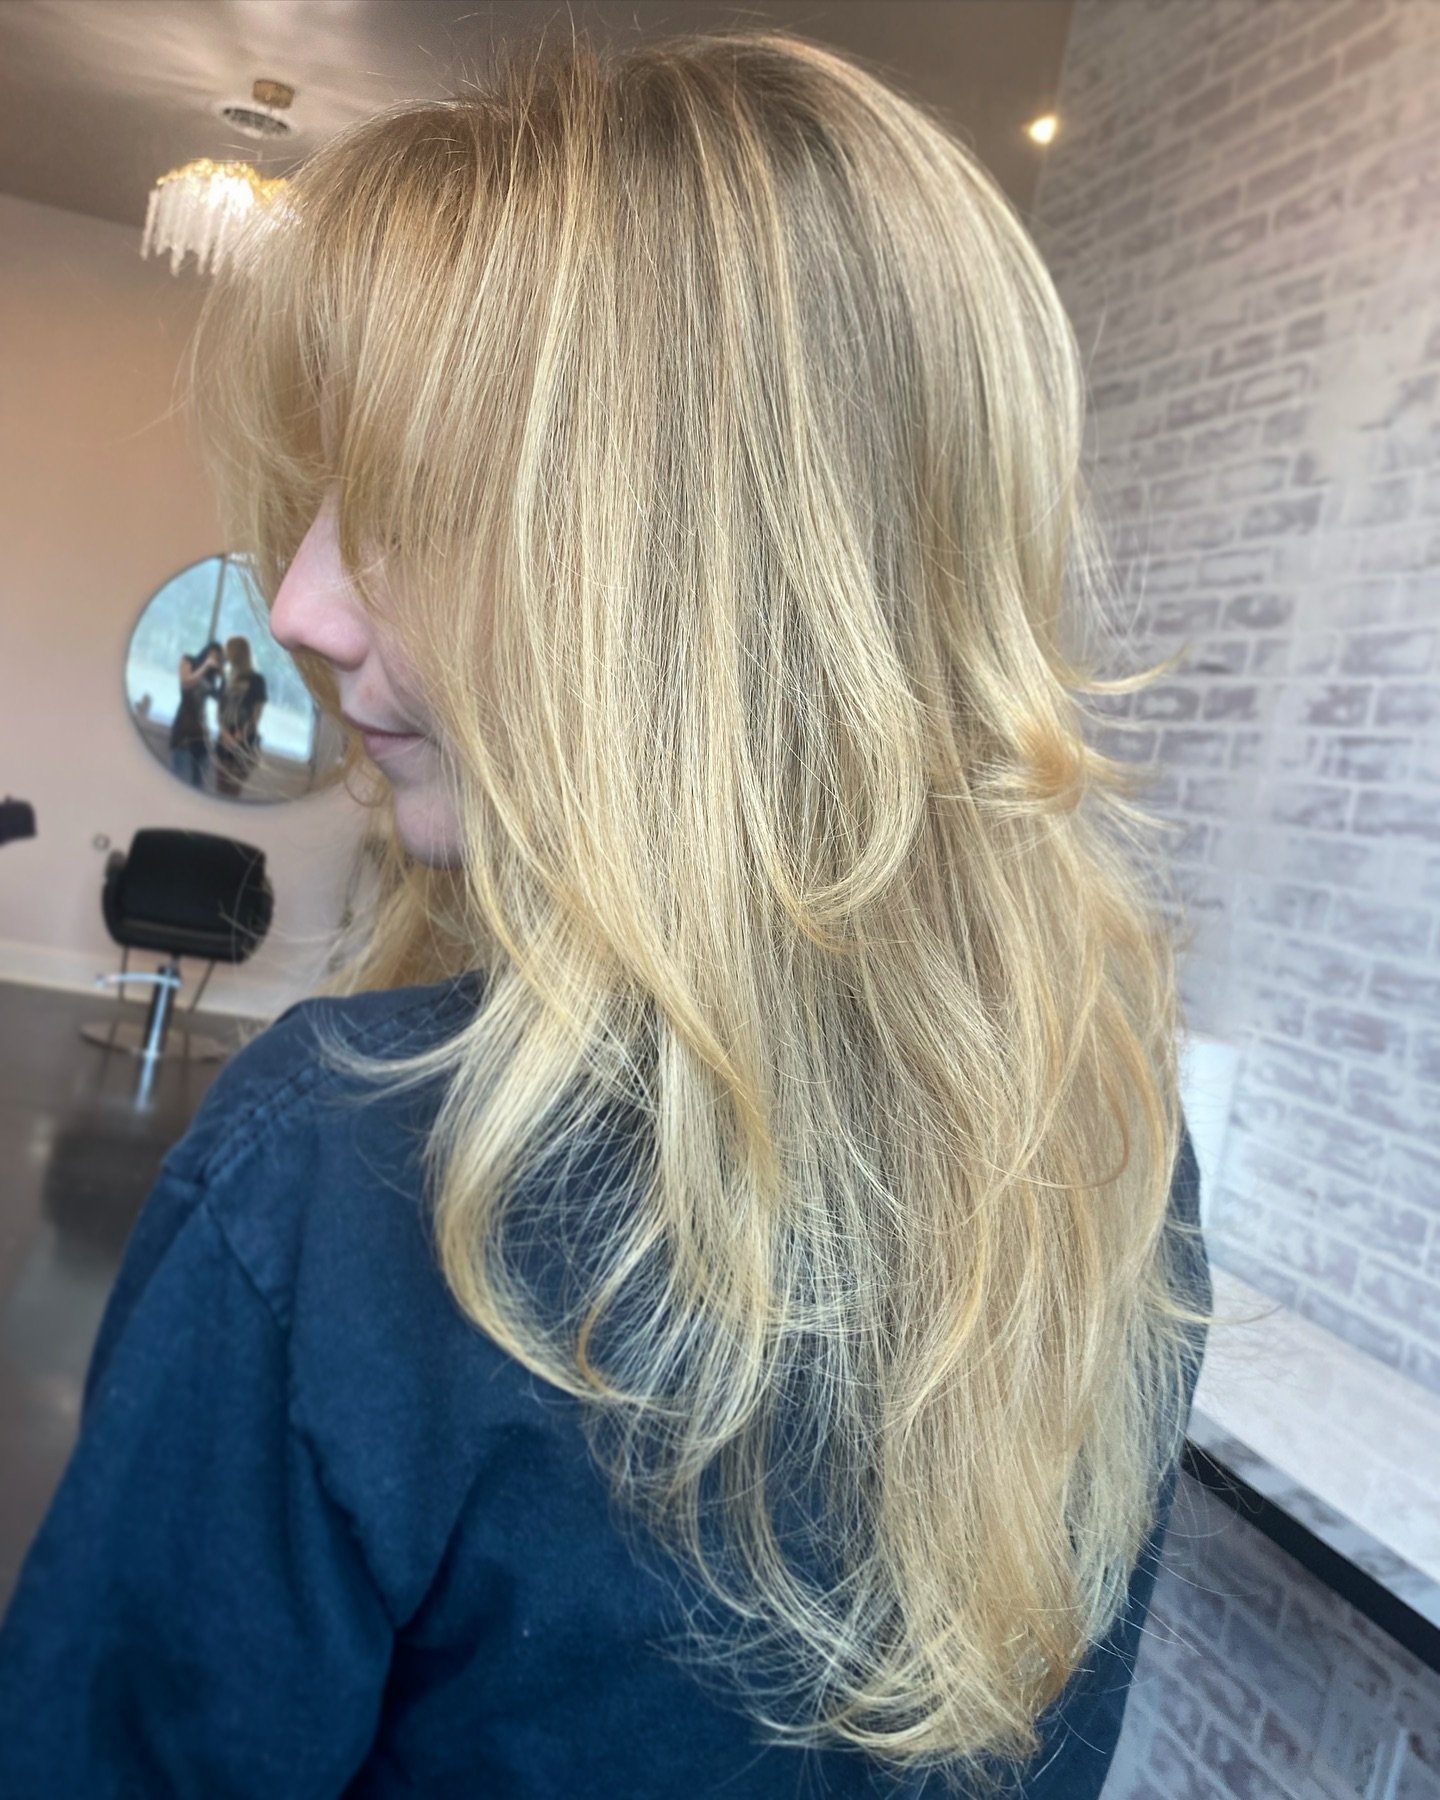 Spring is in the air! 🌼🤍✨

Natural blonde + layered haircut 🫶🏻

Colored with @redkenpro 

&bull;
&bull;
&bull;
#518hair #albanyny #lathamny #salon #518salon #highlights #balayage #haircut #blondehair #blondehighlights #redken #haircolor #highligh